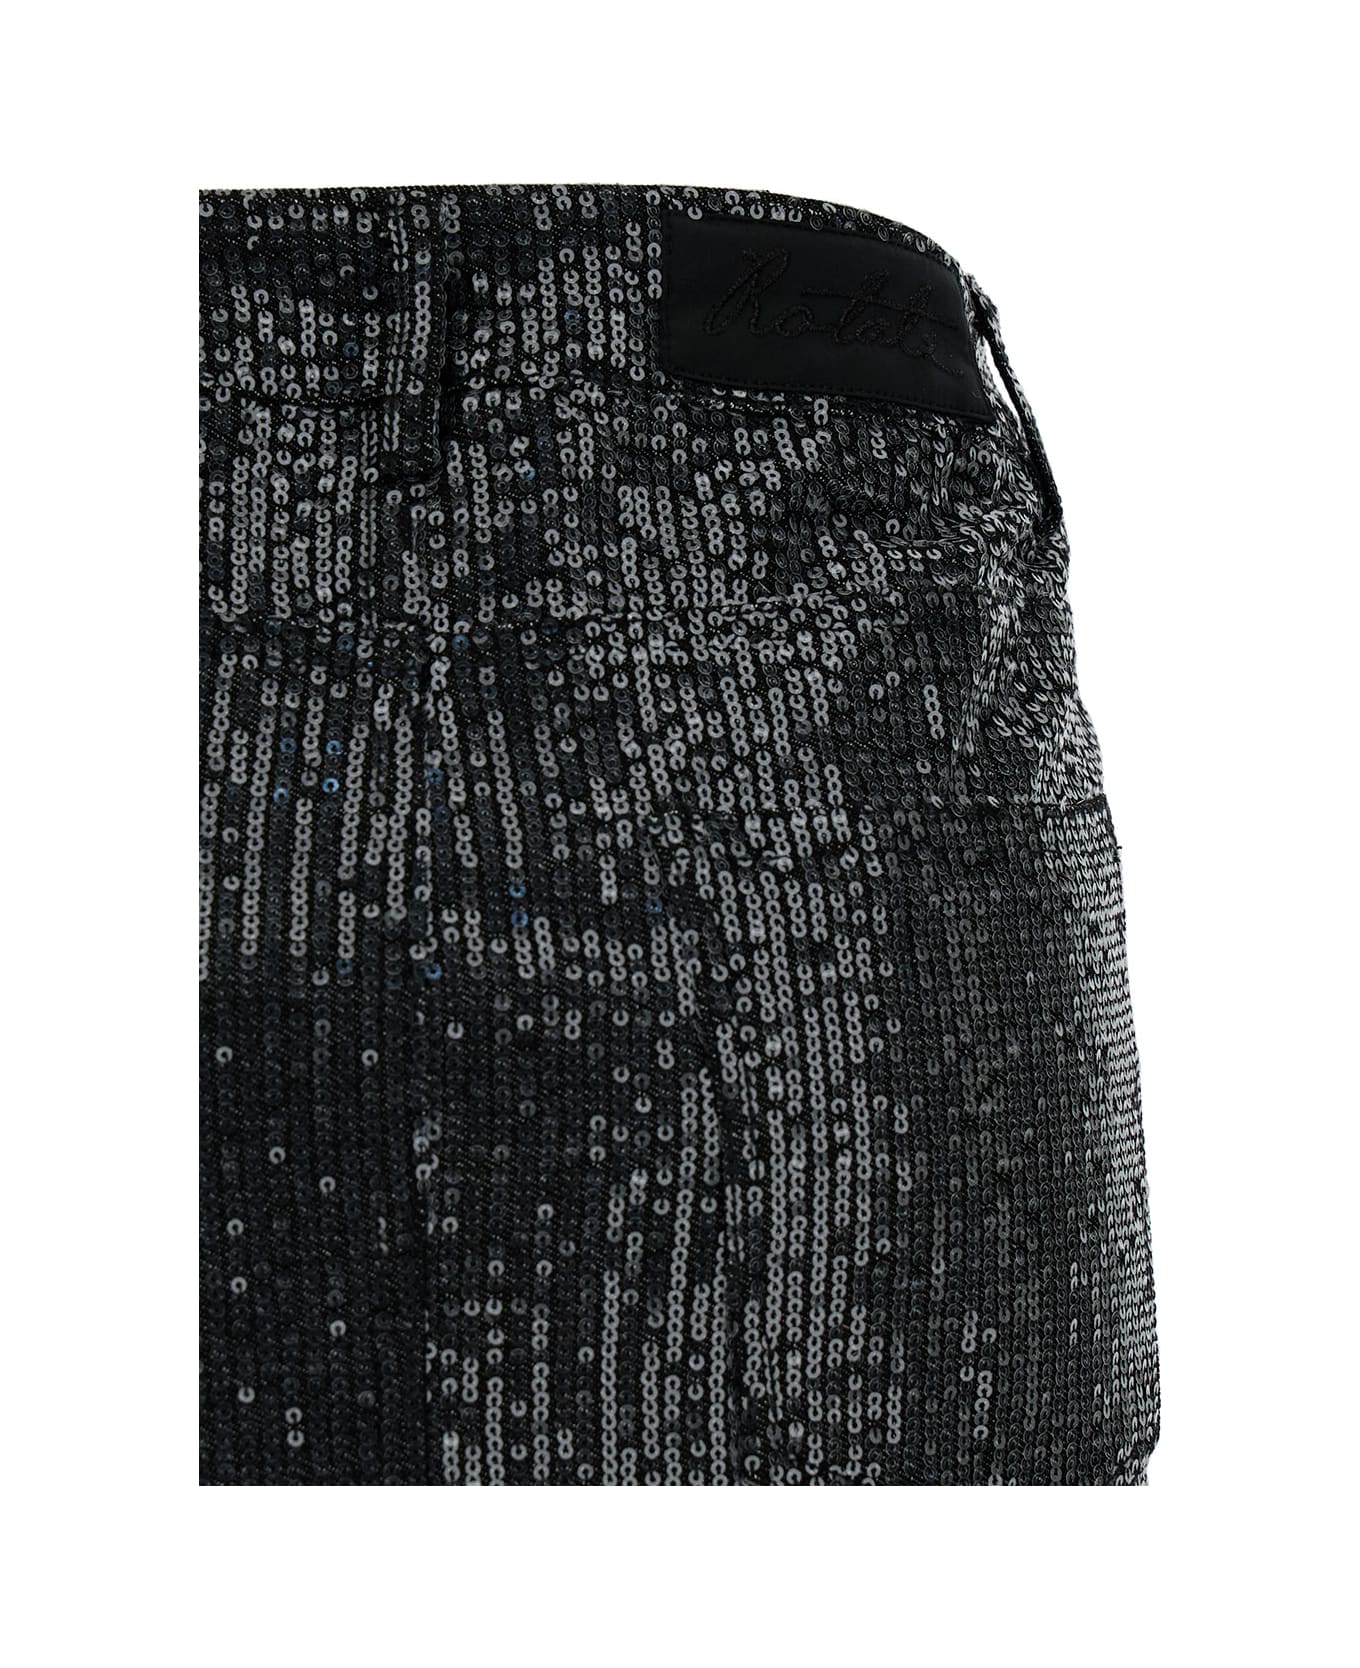 Rotate by Birger Christensen Black Mini-skirt With All-over Paillettes And Logo Patch In Cotton Woman - Black